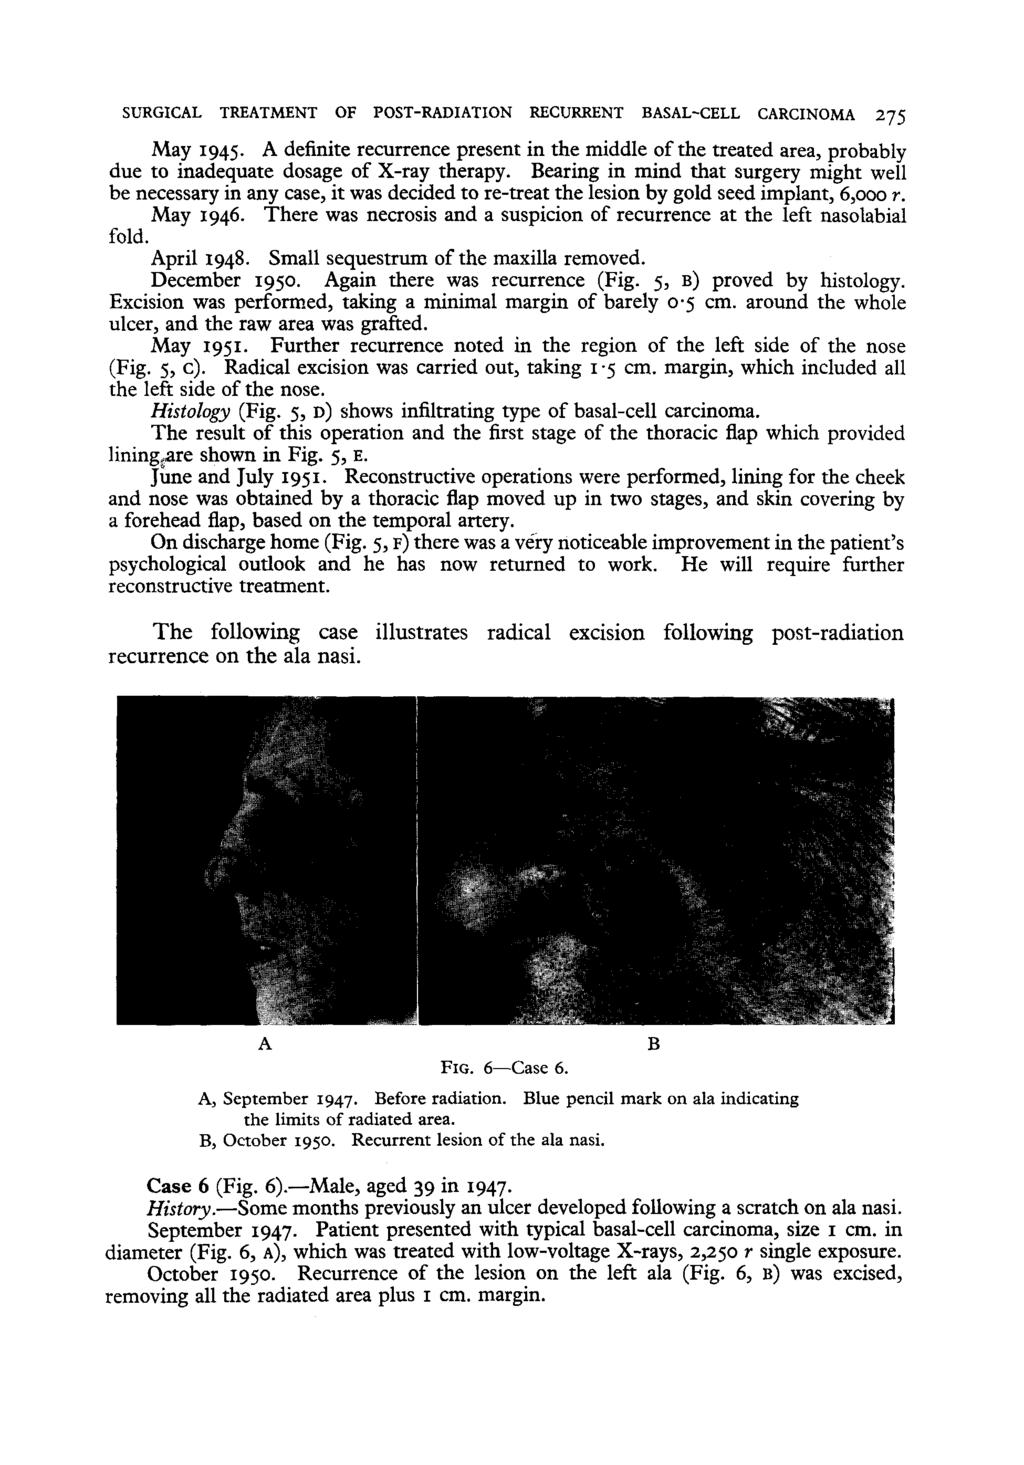 SURGICAL TREATMENT OF POST-RADIATION RECURRENT BASAL-CELL CARCINOMA 275 May 1945- A definite recurrence present in the middle of the treated area, probably due to inadequate dosage of X-ray therapy.